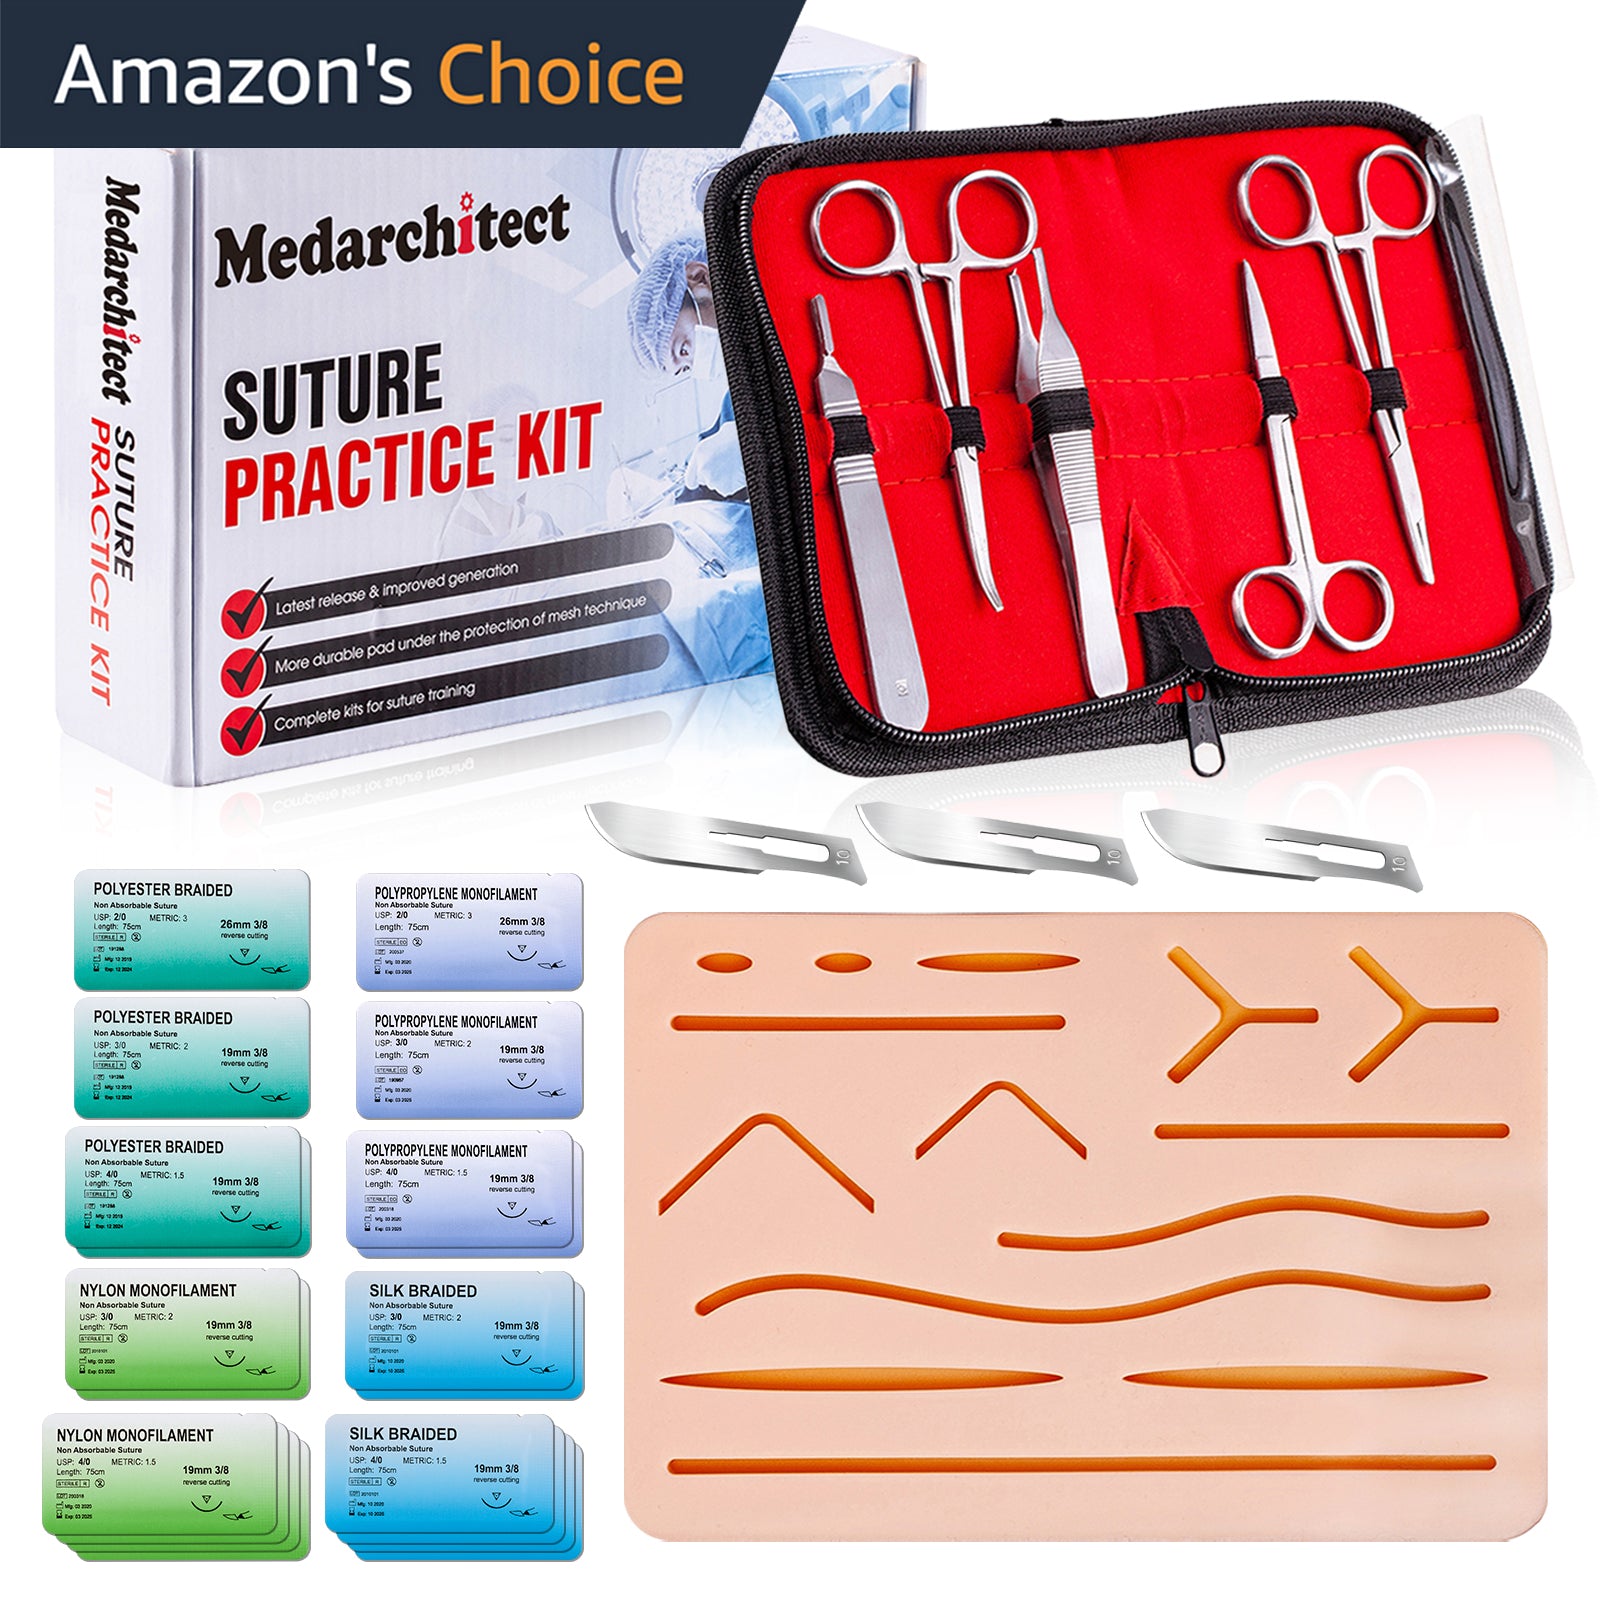 Suture Practice Kit (30 Pieces) for Medical Student Suture Training, Include Upgrade Suture Pad with 14 Pre-Cut Wounds, Suture Tools, Suture Thread & Needle (Complete Kit) - [shop_medarchitect]